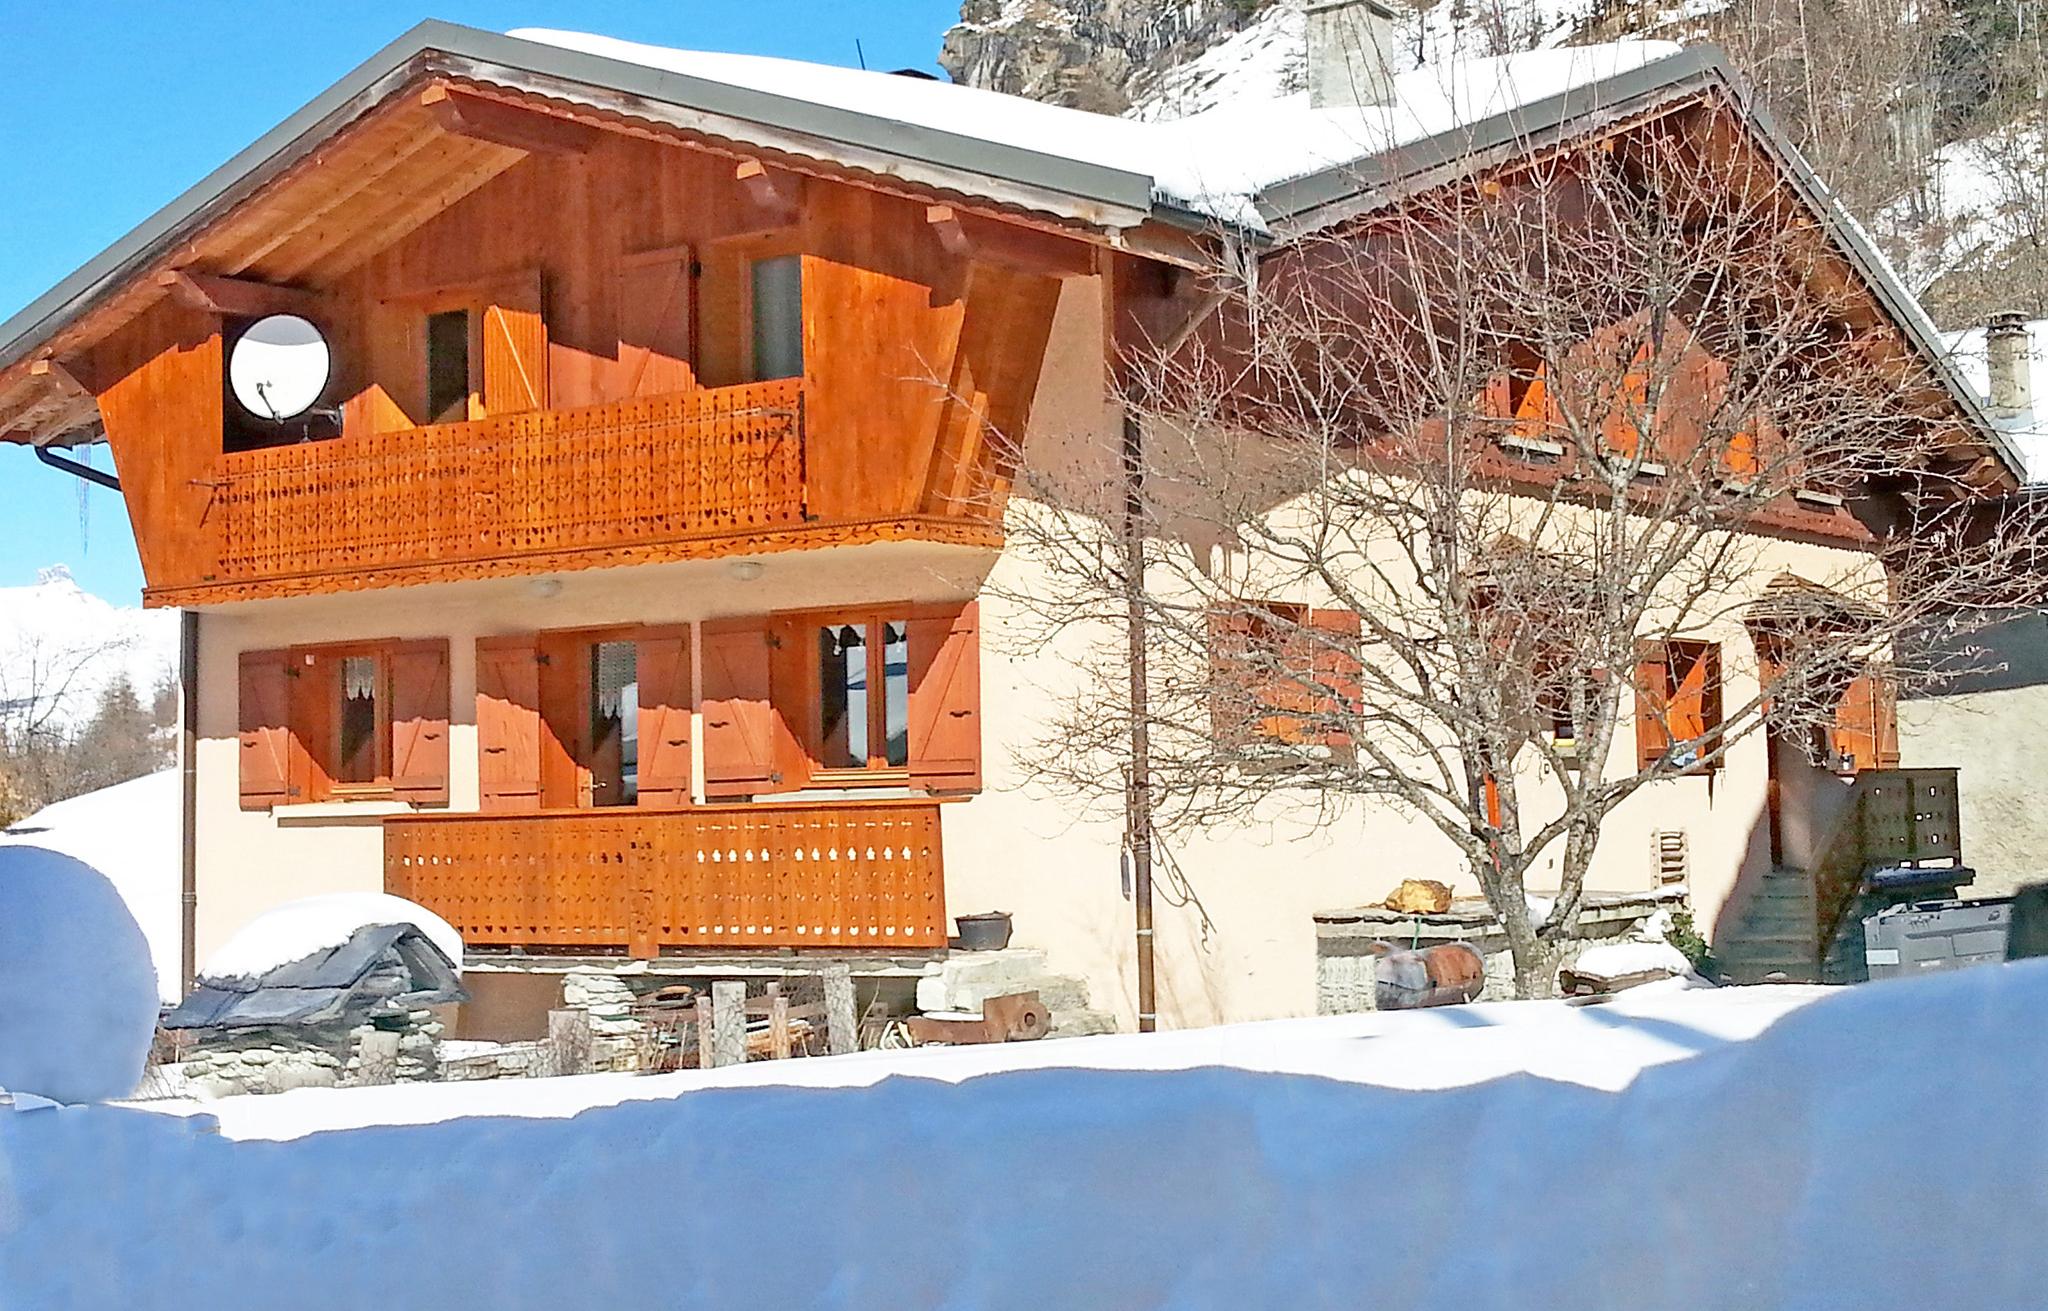 Chalet d&apos;Alfred